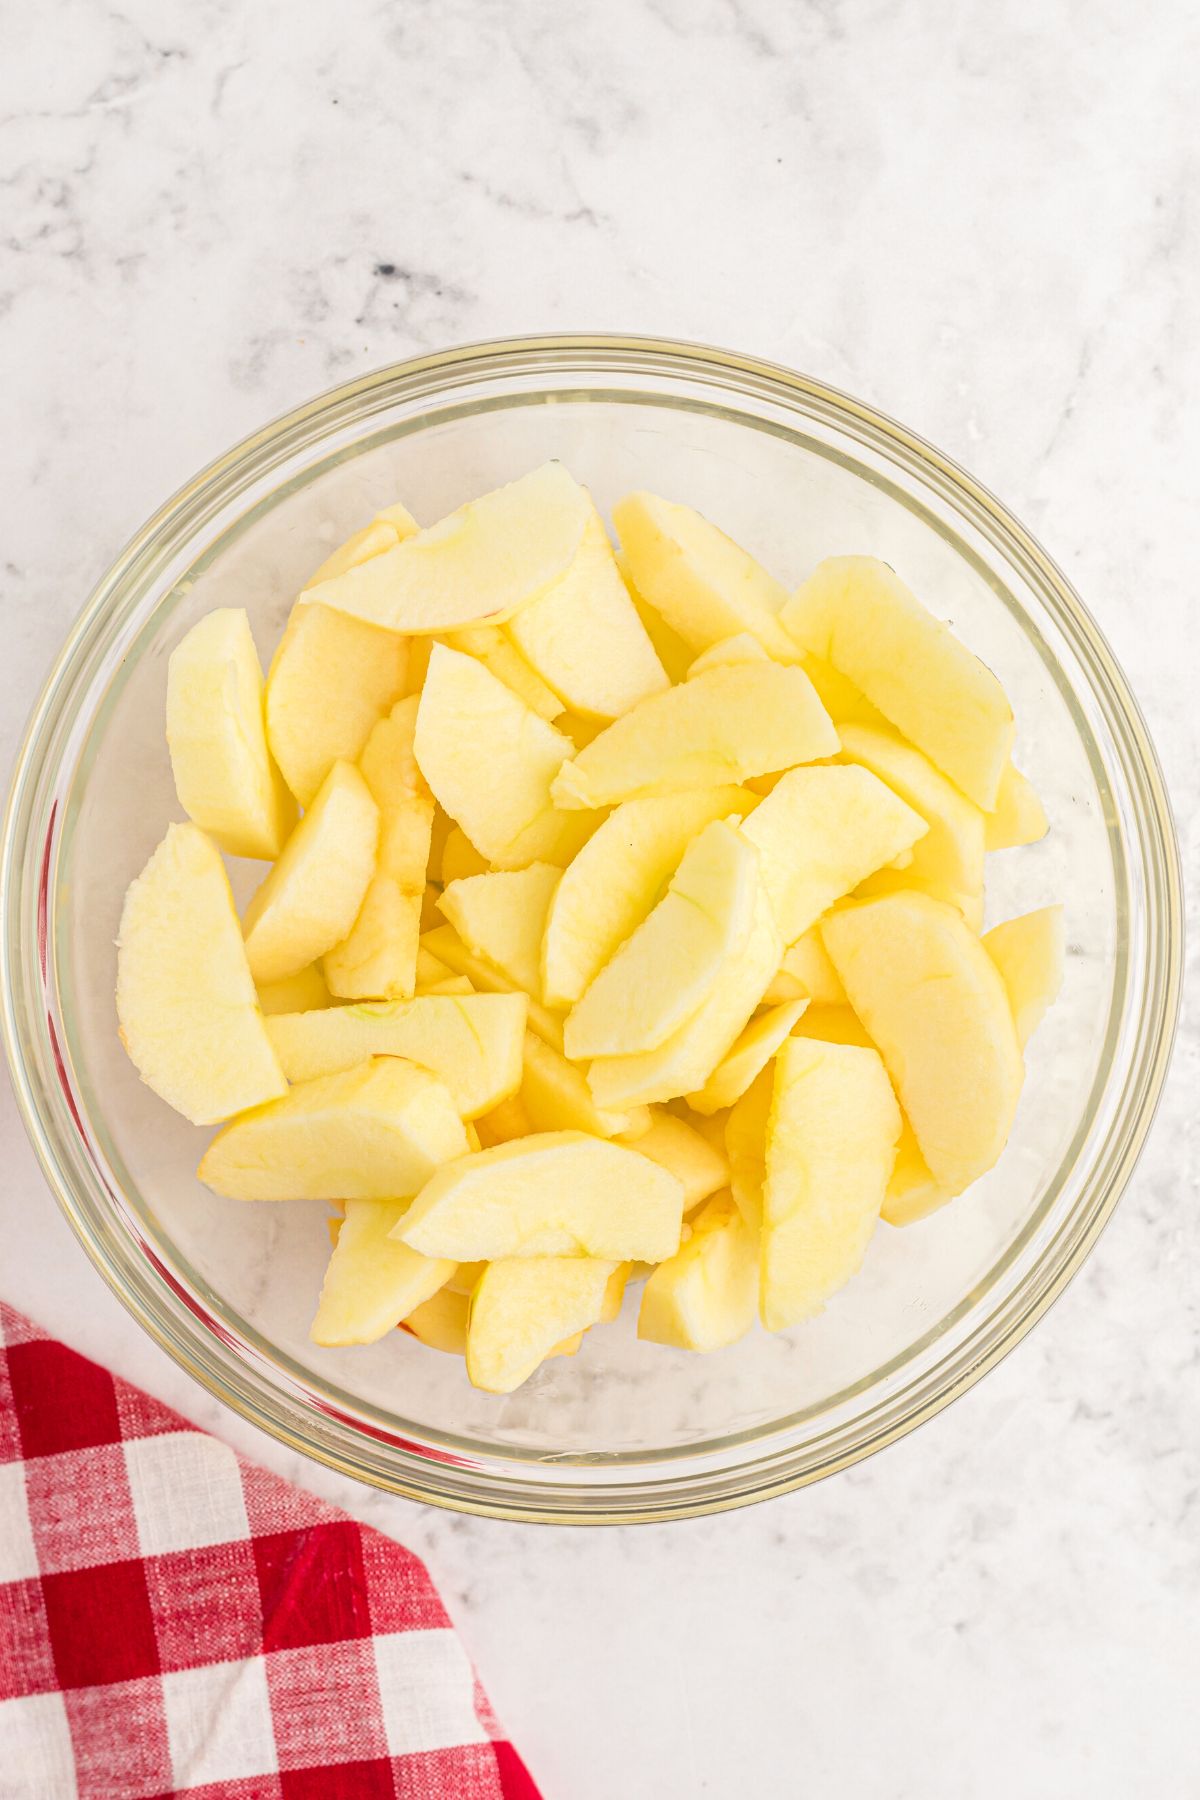 Apples cut into small slices in a clear glass bowl